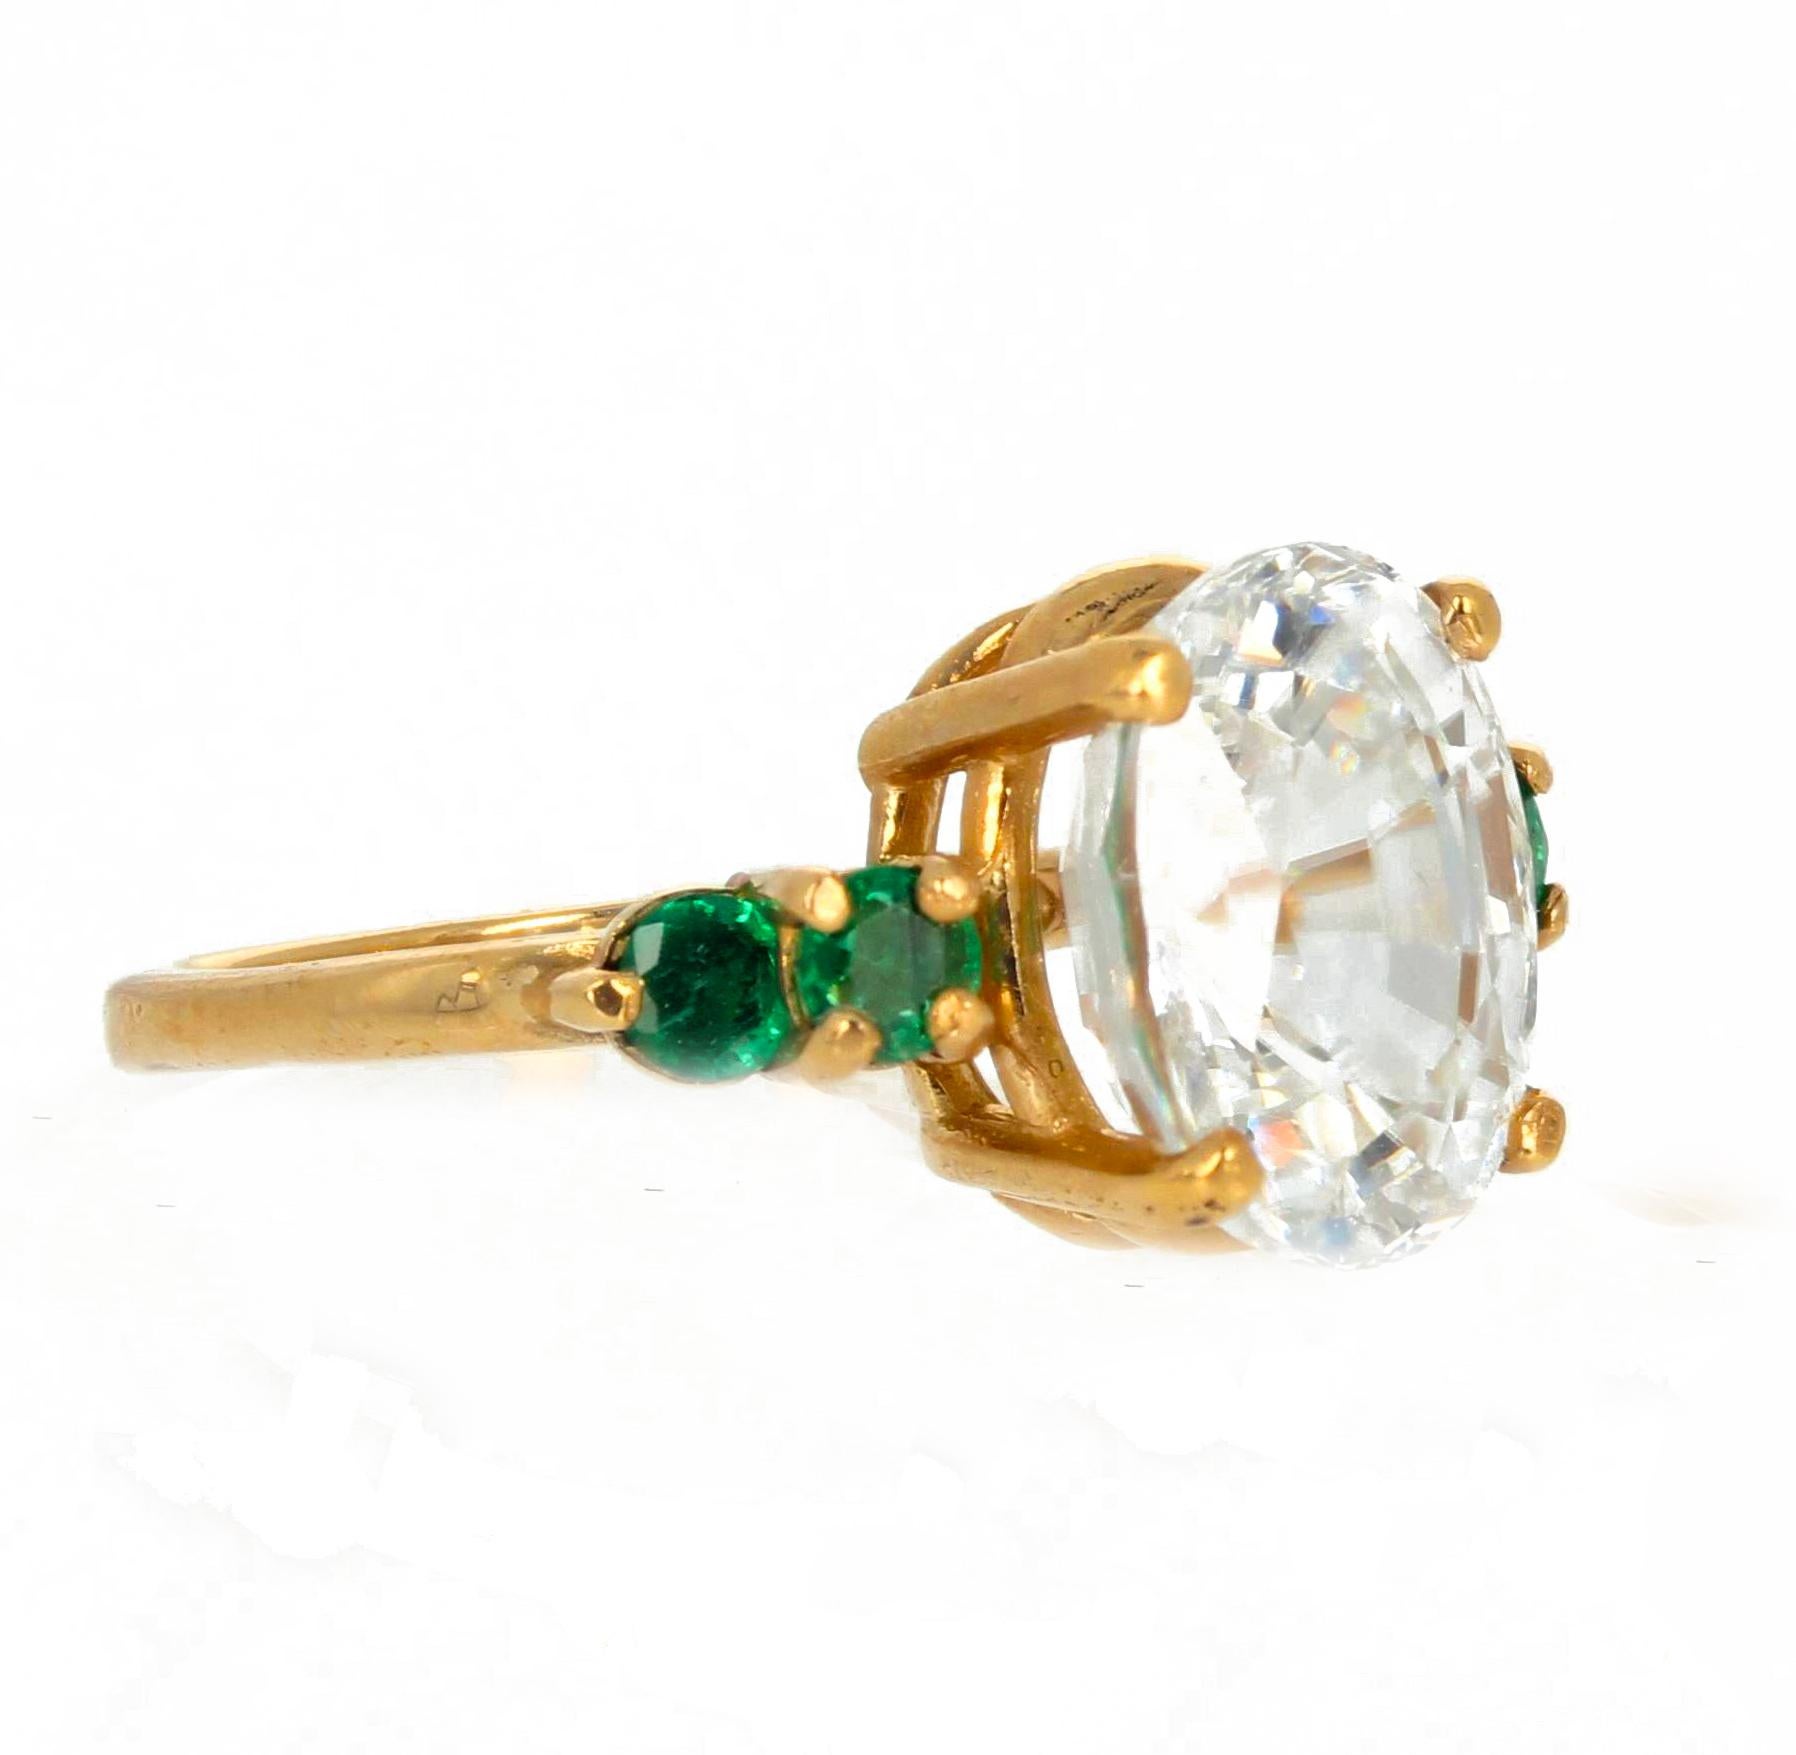 Mixed Cut AJD Glittering 4 Ct. White Zircon & Natural REAL Green Emeralds Yellow Gold Ring For Sale